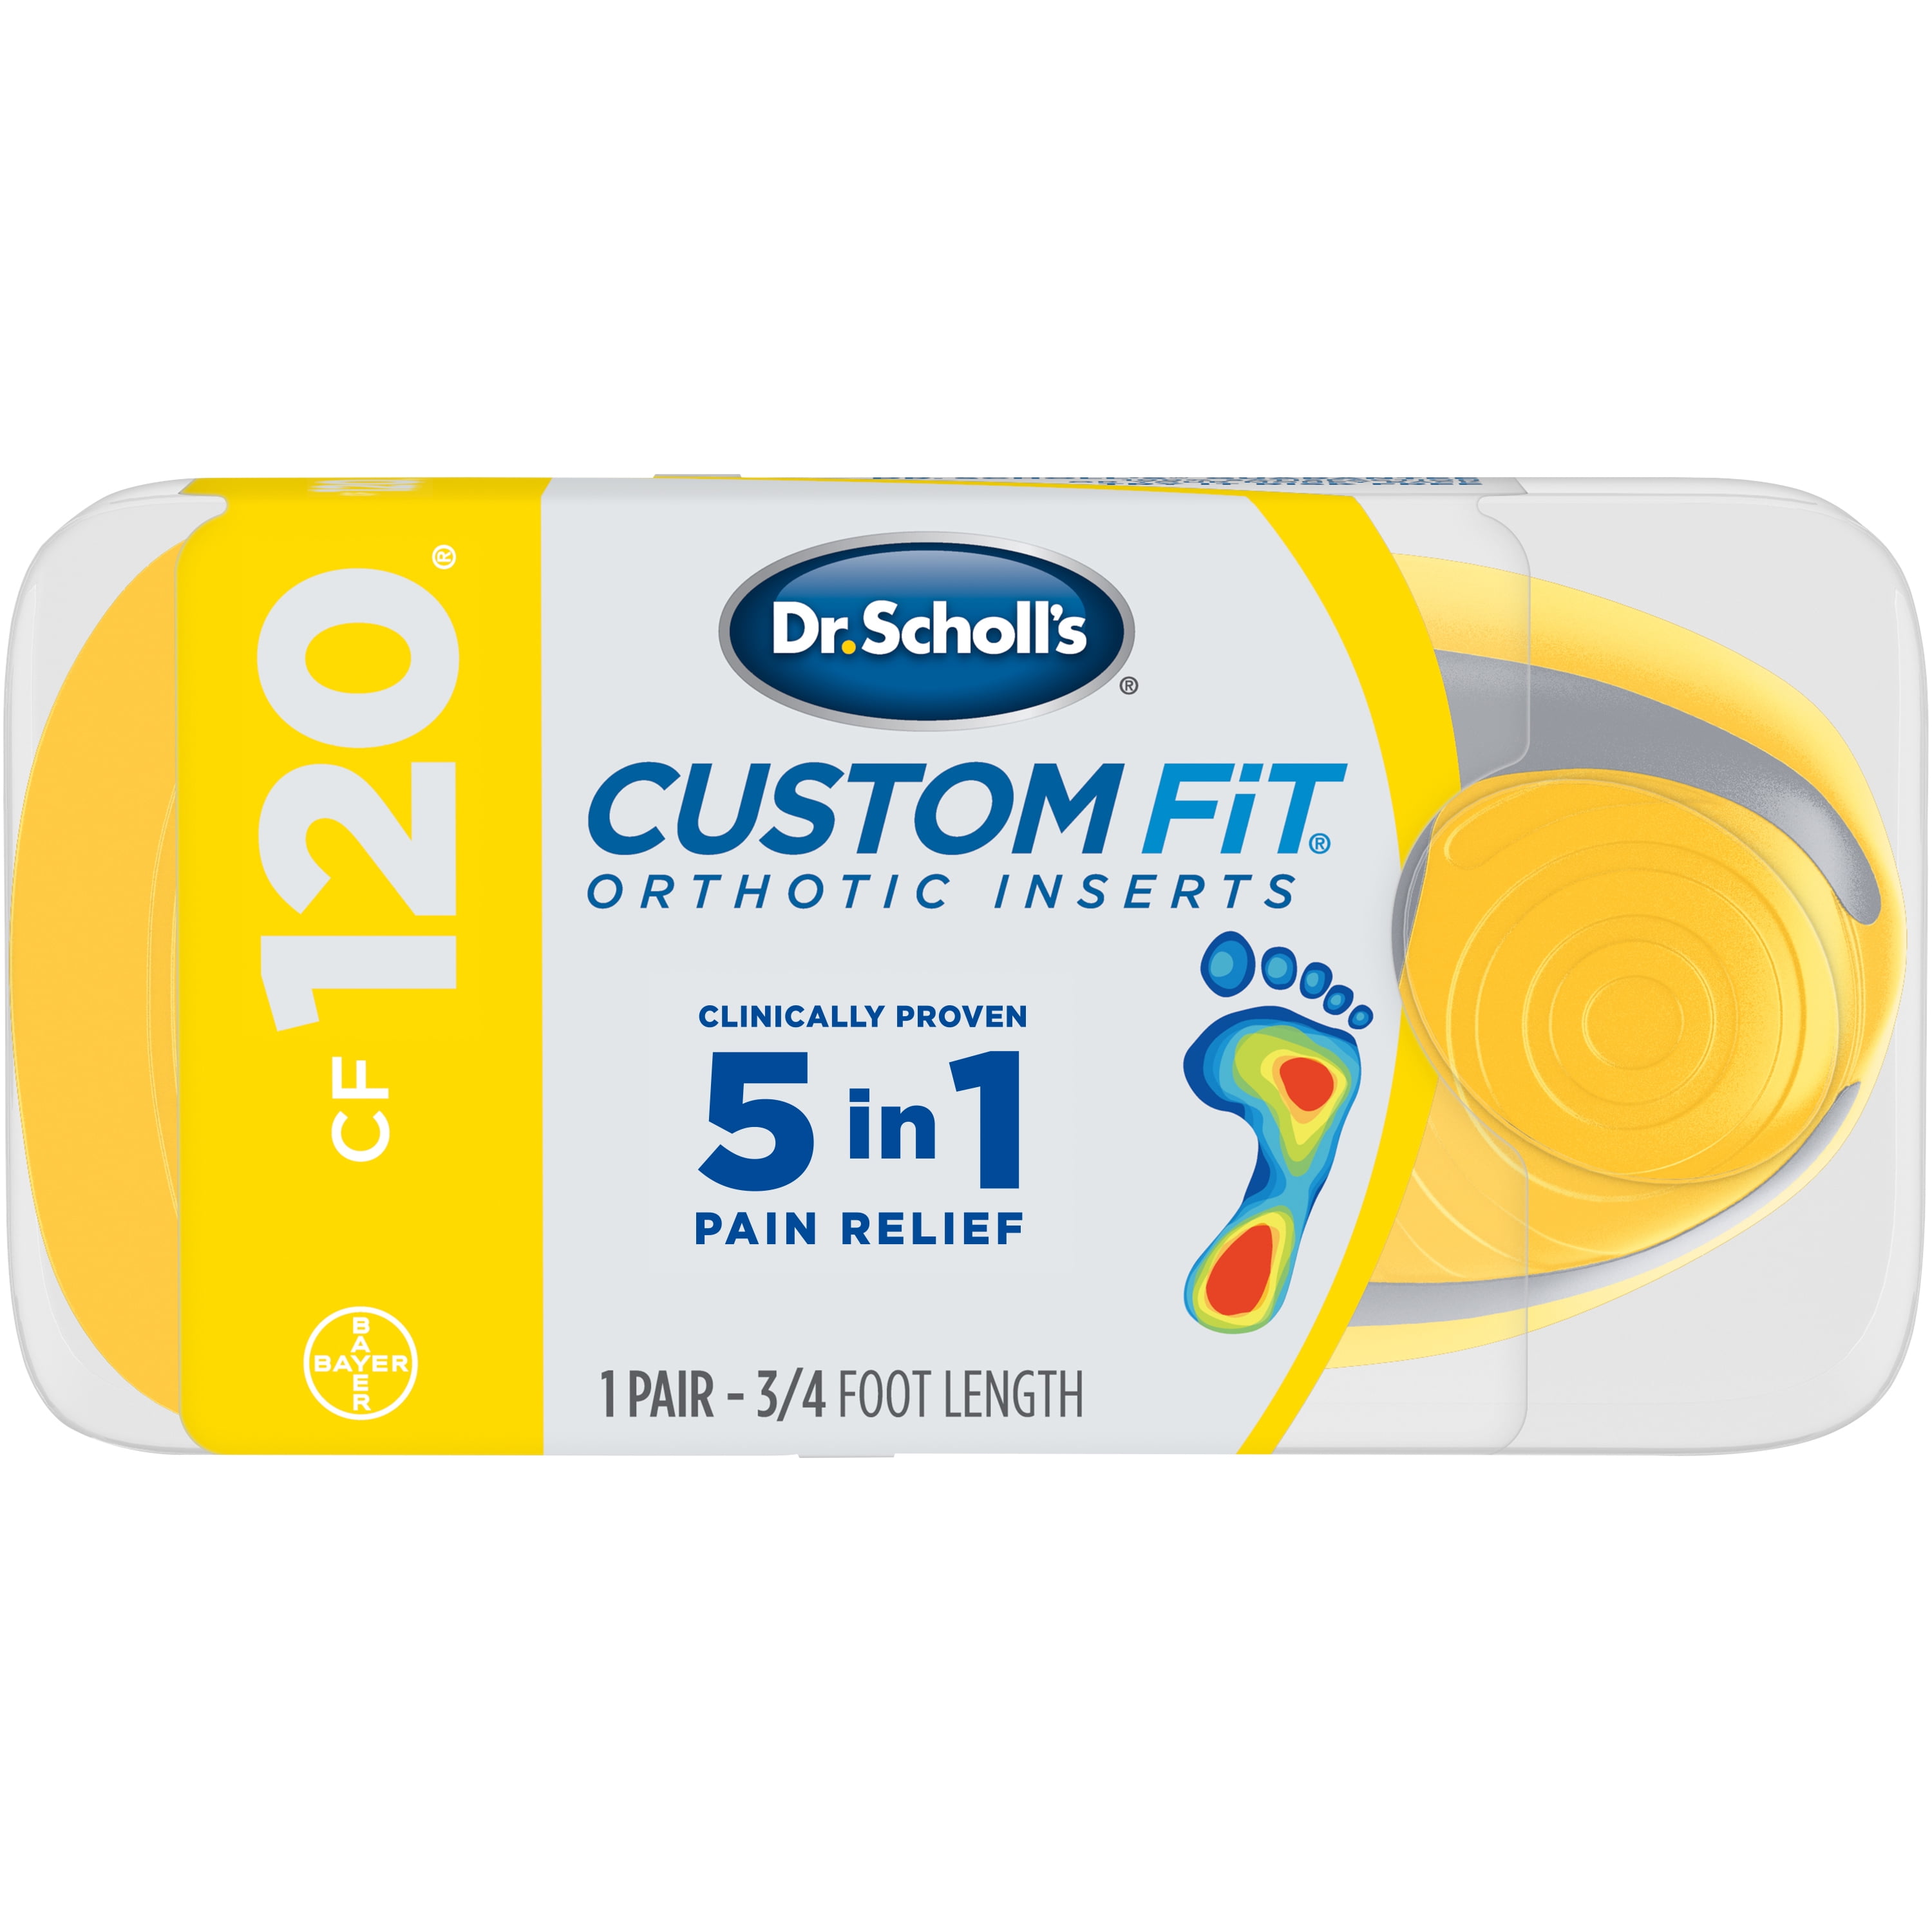 dr scholl's custom fit sizes